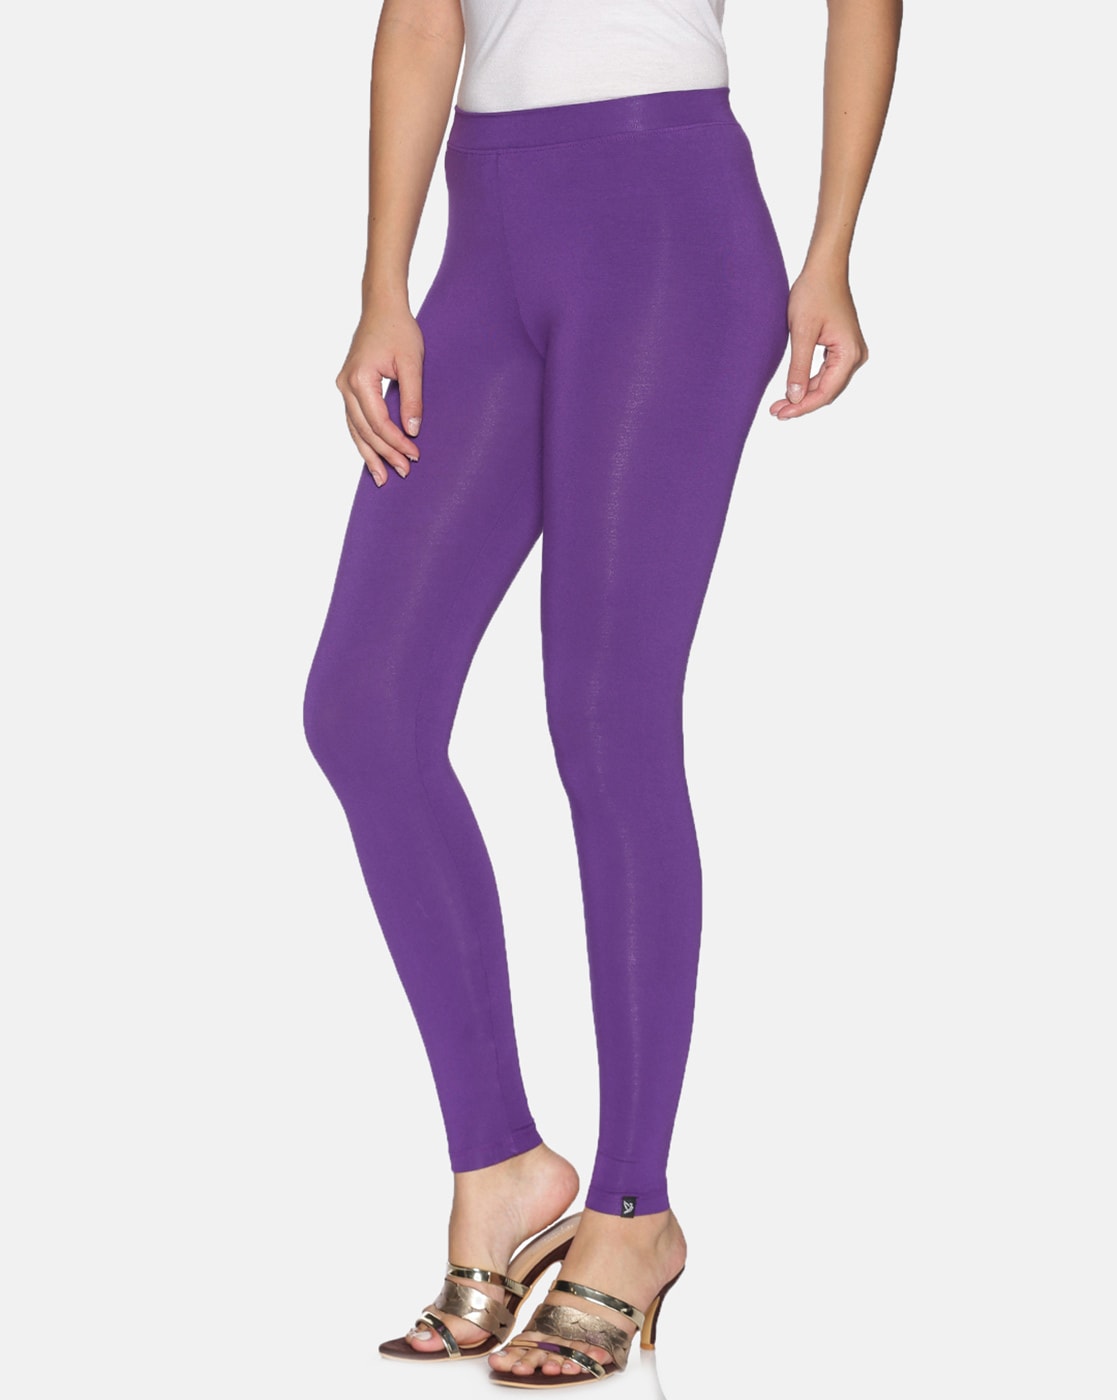 Avia Womens Core Performance Purple Leggings Size S (4-6) New With Tags